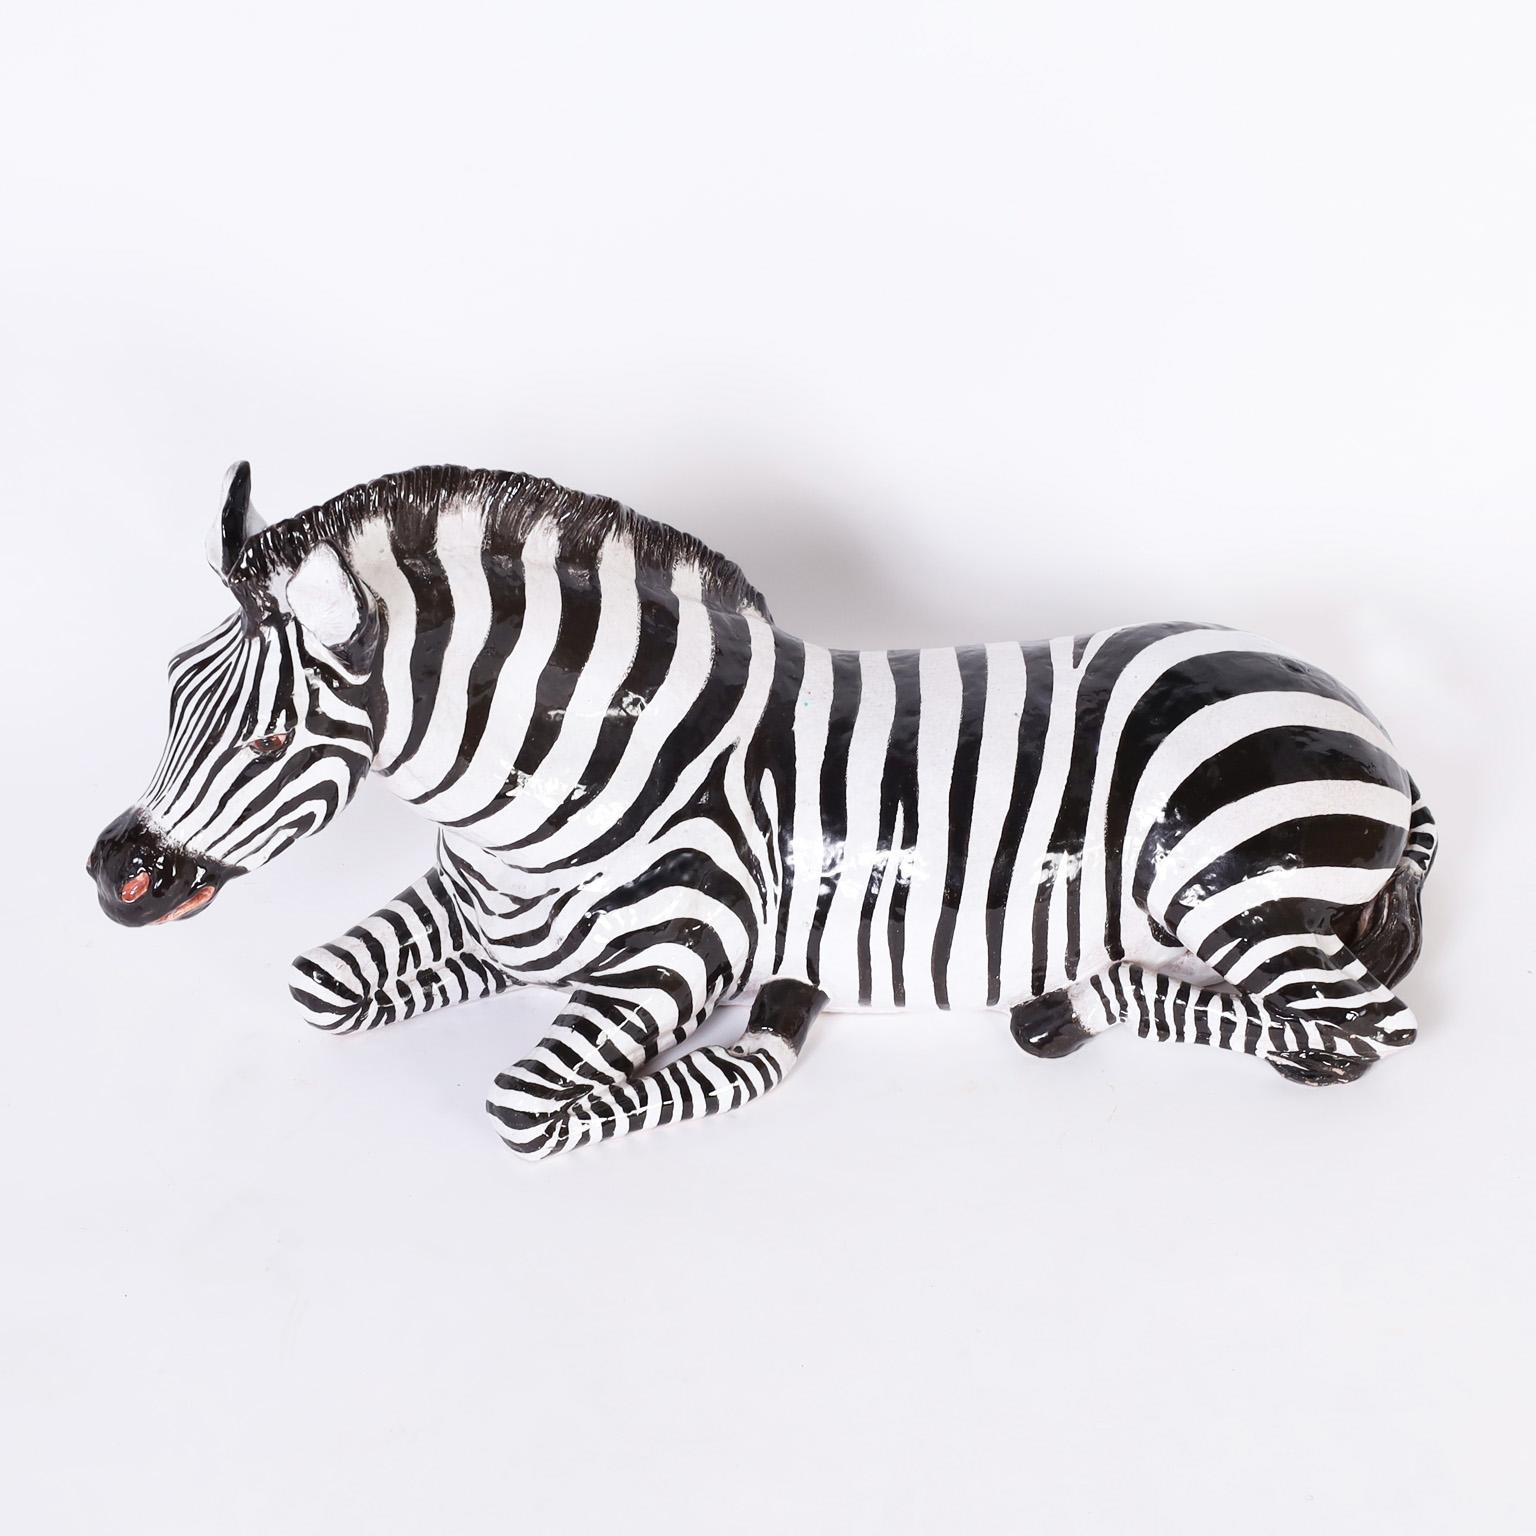 Mid century zebra sculpture crafted in terra cotta, decorated, glazed and forever in repose. Signed Italy on the bottom.